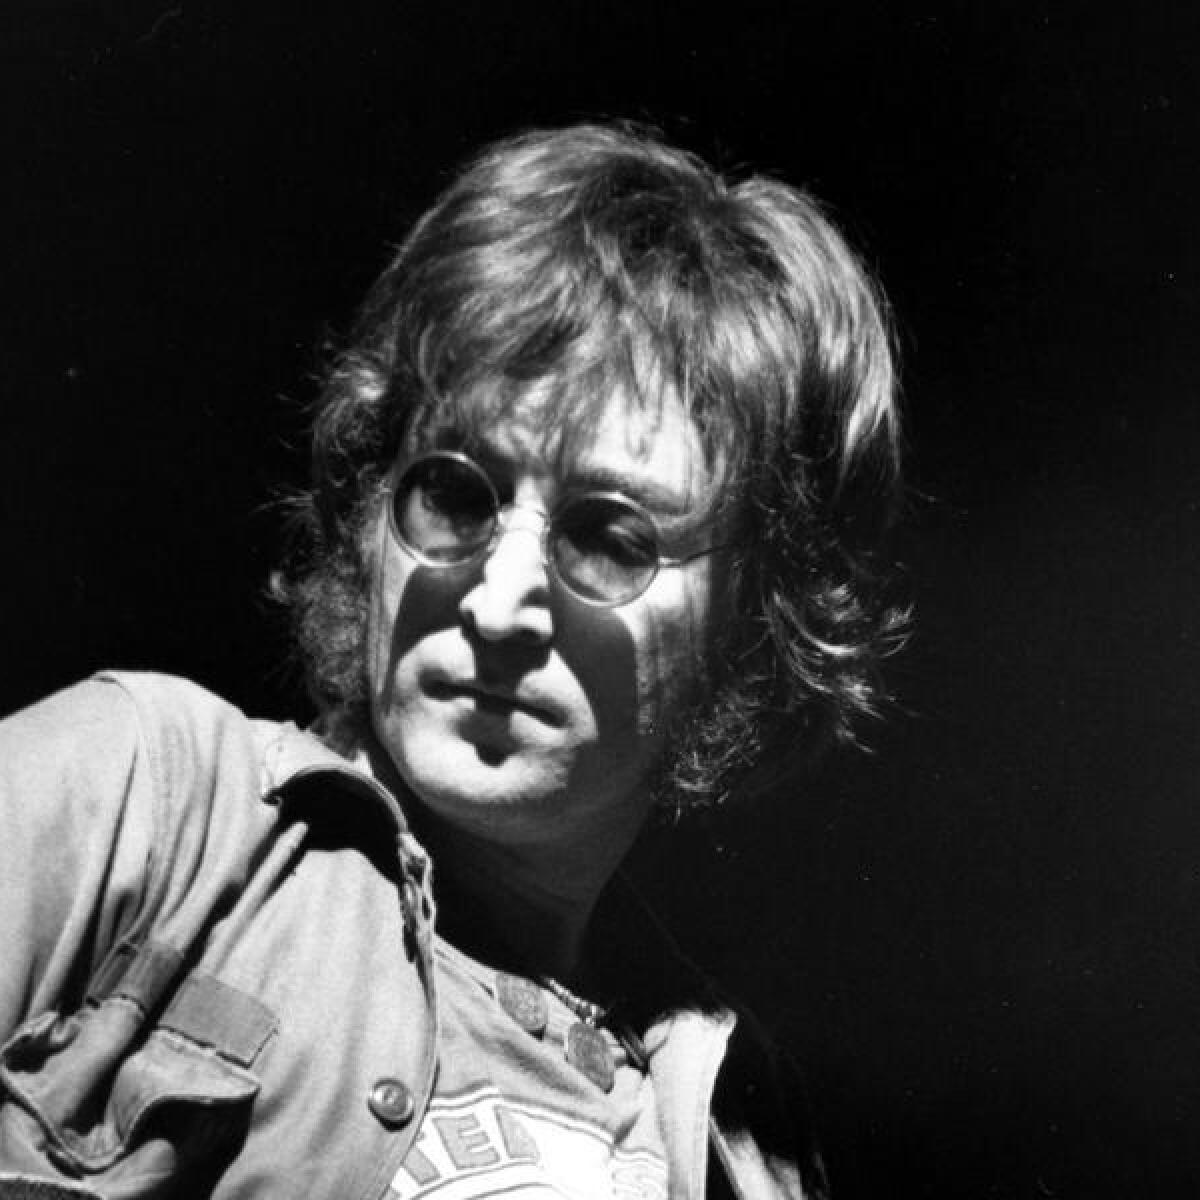 John Lennon's lost 1960s guitar to go up for auction